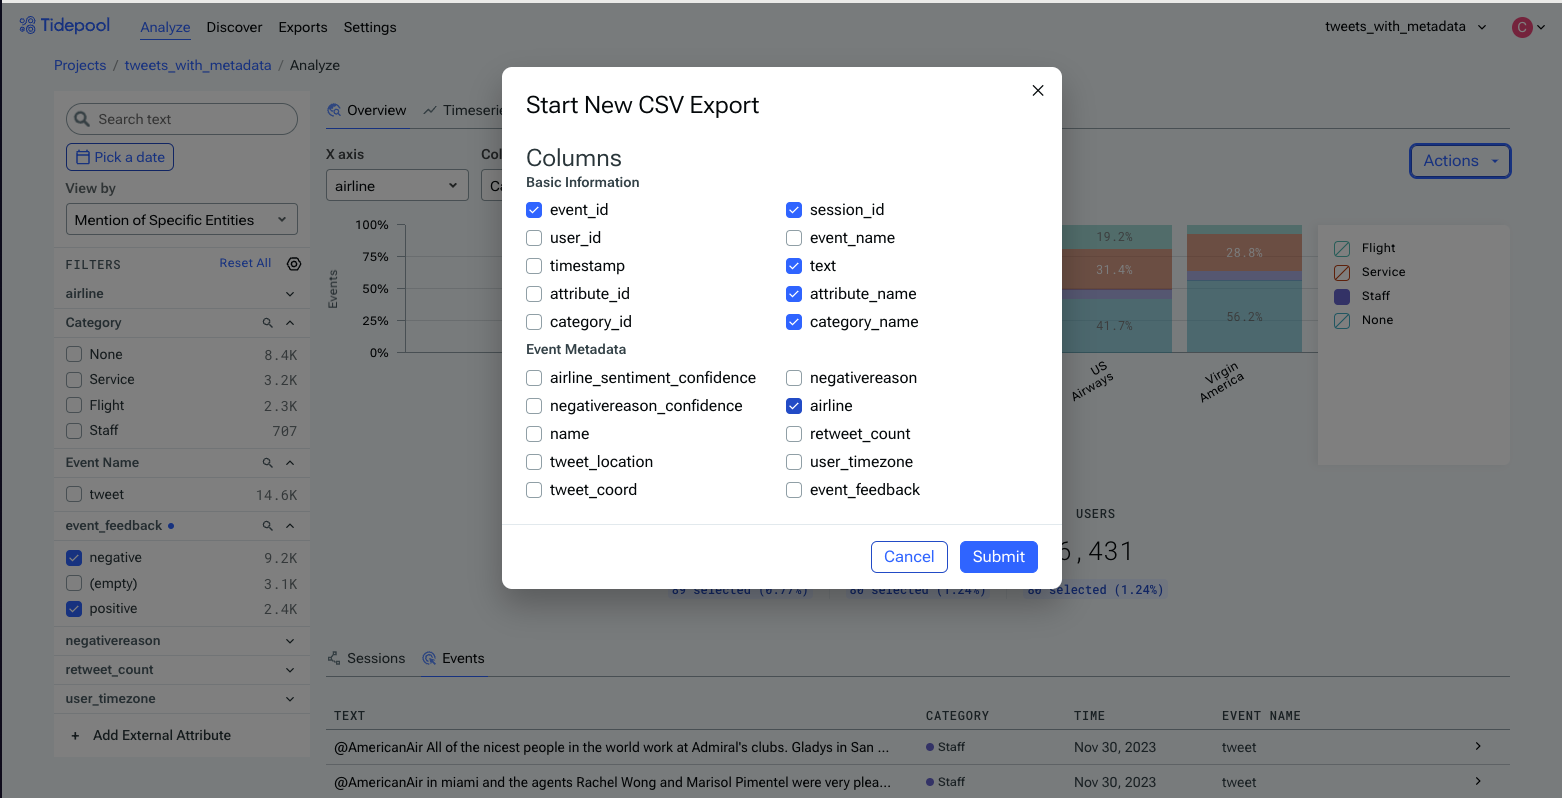 The CSV Export dialog. Select any subset of the available columns and click Submit to queue the export.